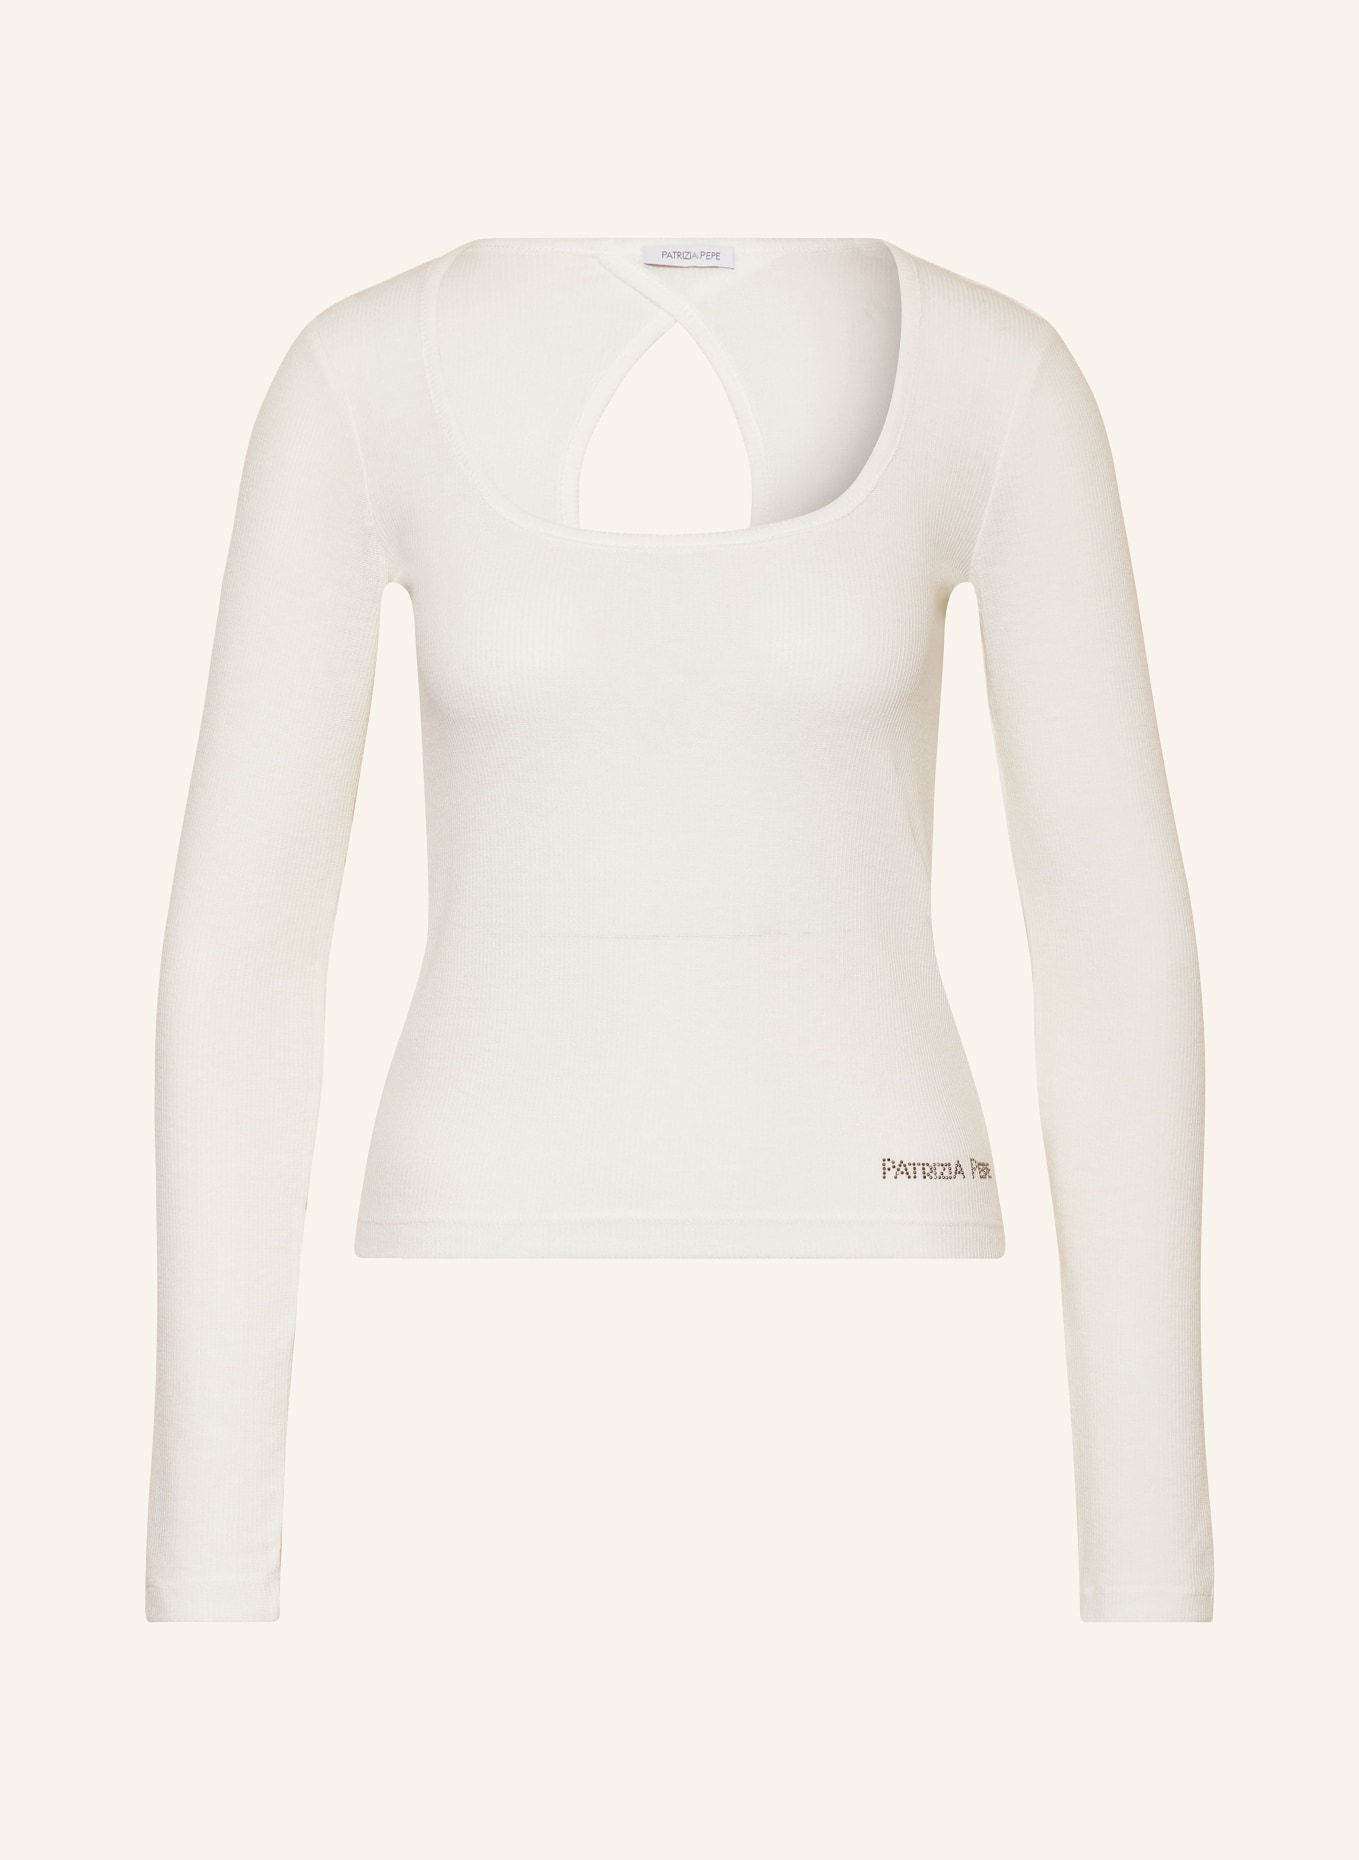 PATRIZIA PEPE Long sleeve shirt with decorative gems and cut-out, Color: WHITE (Image 1)